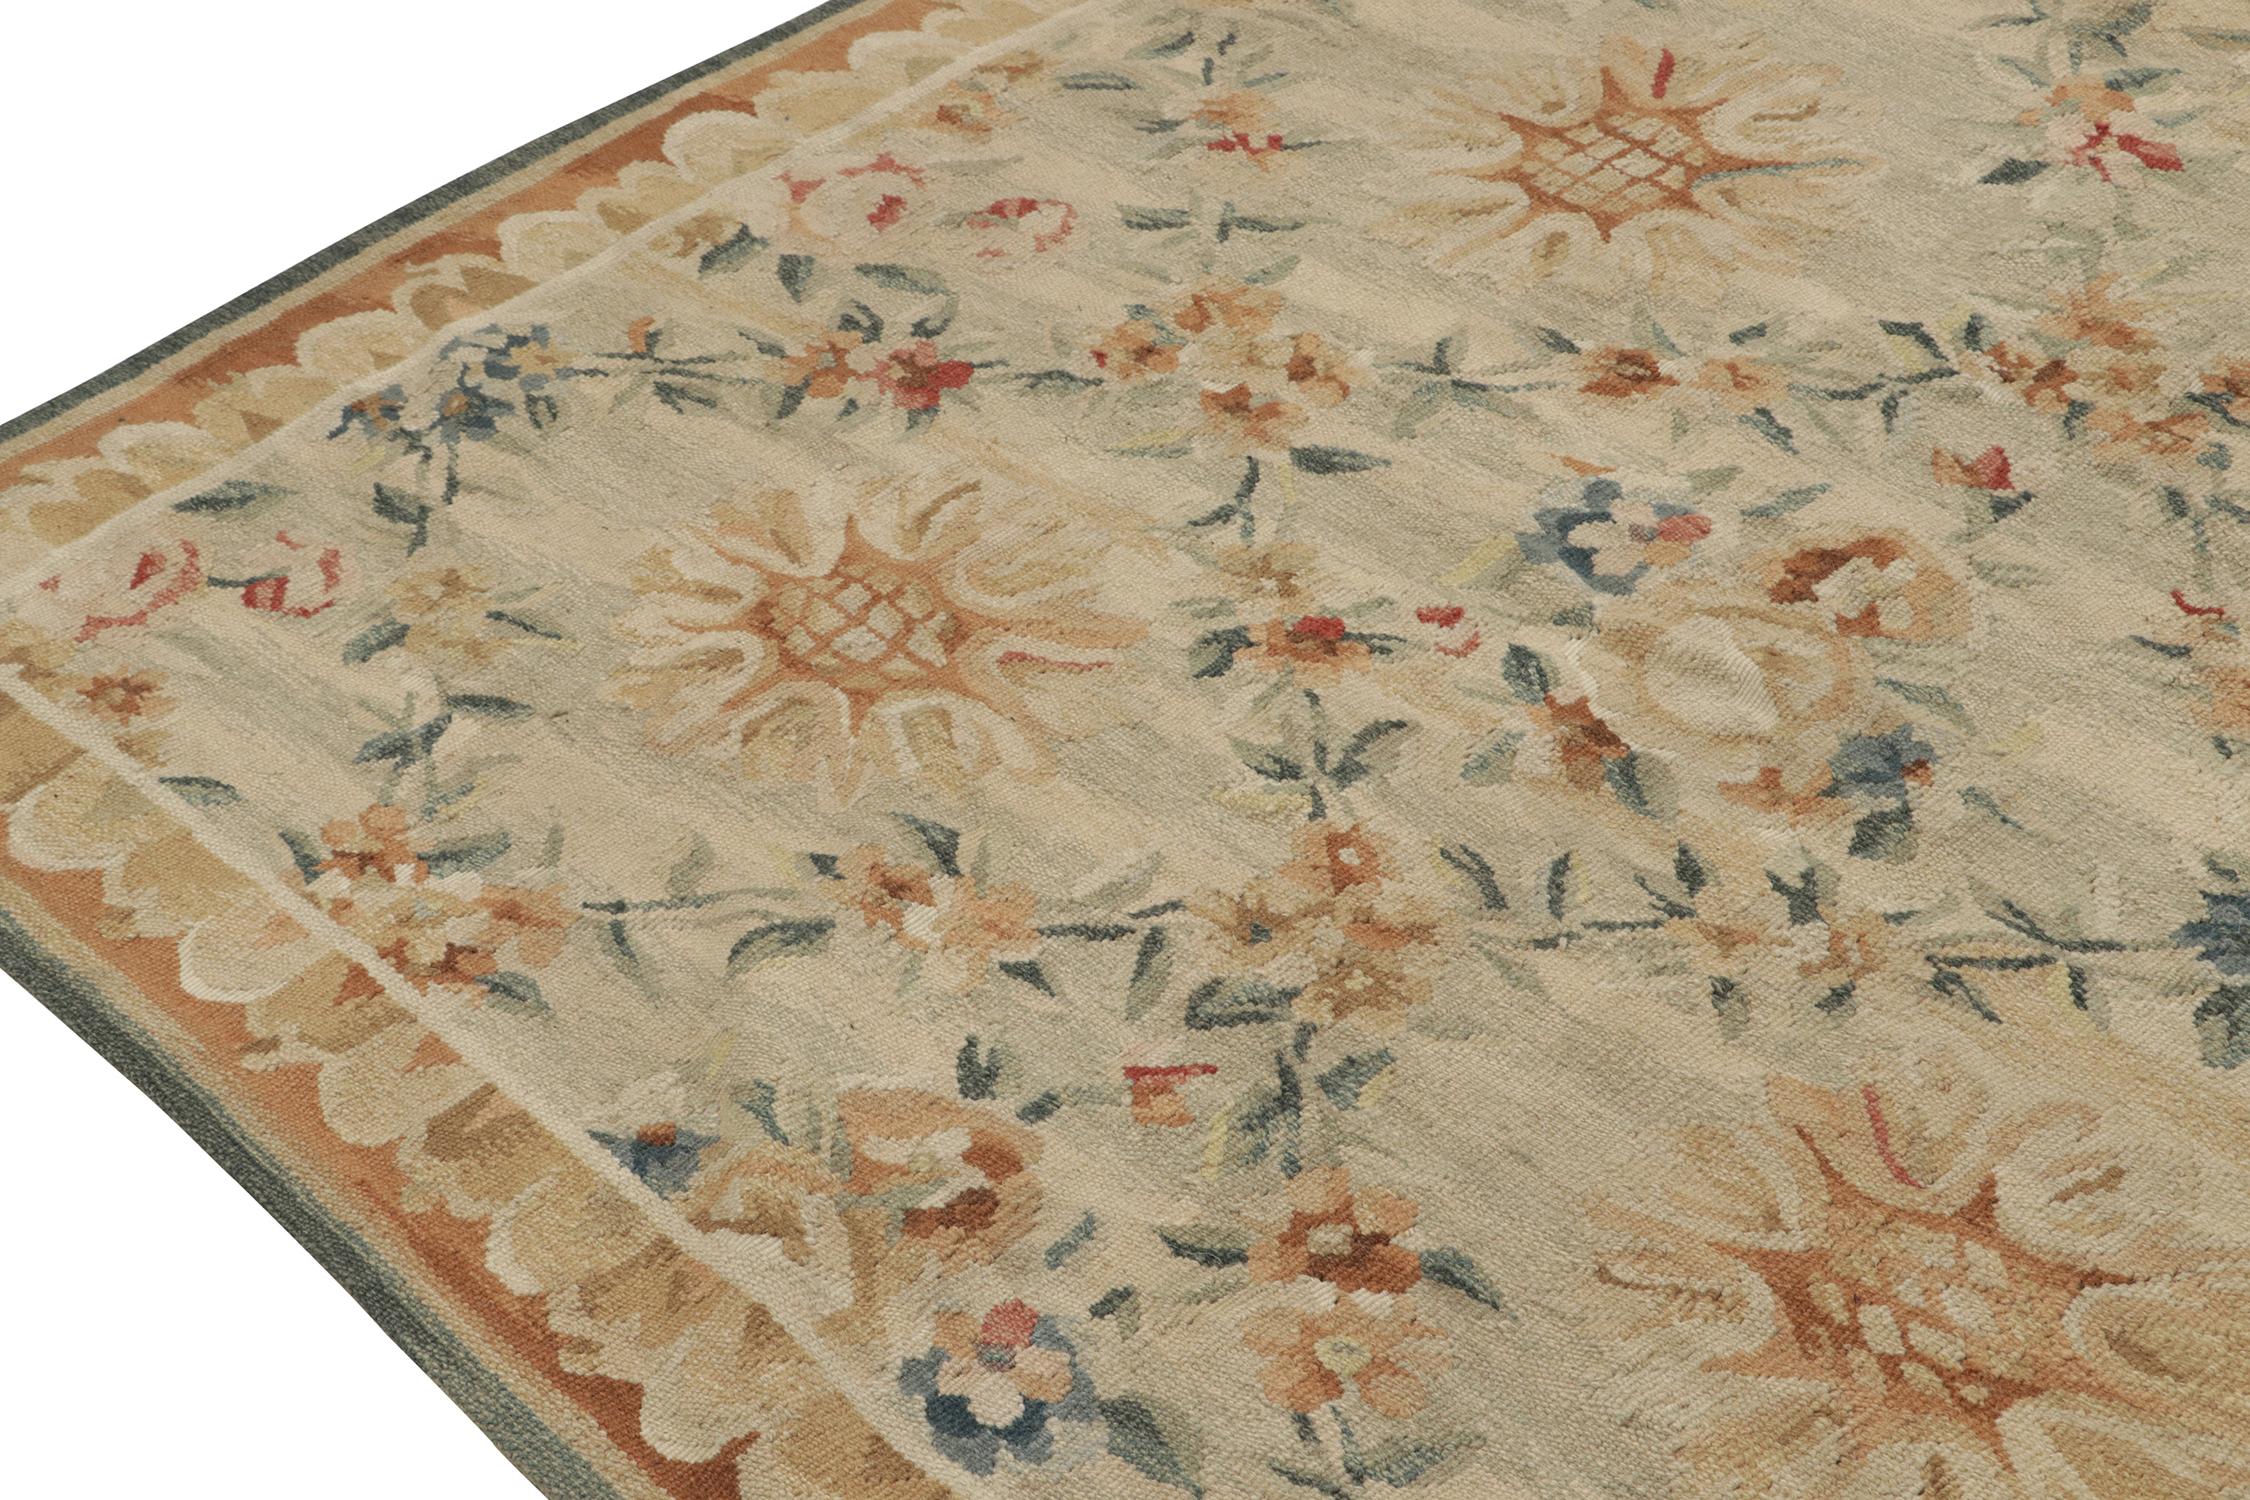 Rug & Kilim’s Aubusson style Flat Weave in Beige, Gold, Blue Floral Pattern In New Condition For Sale In Long Island City, NY